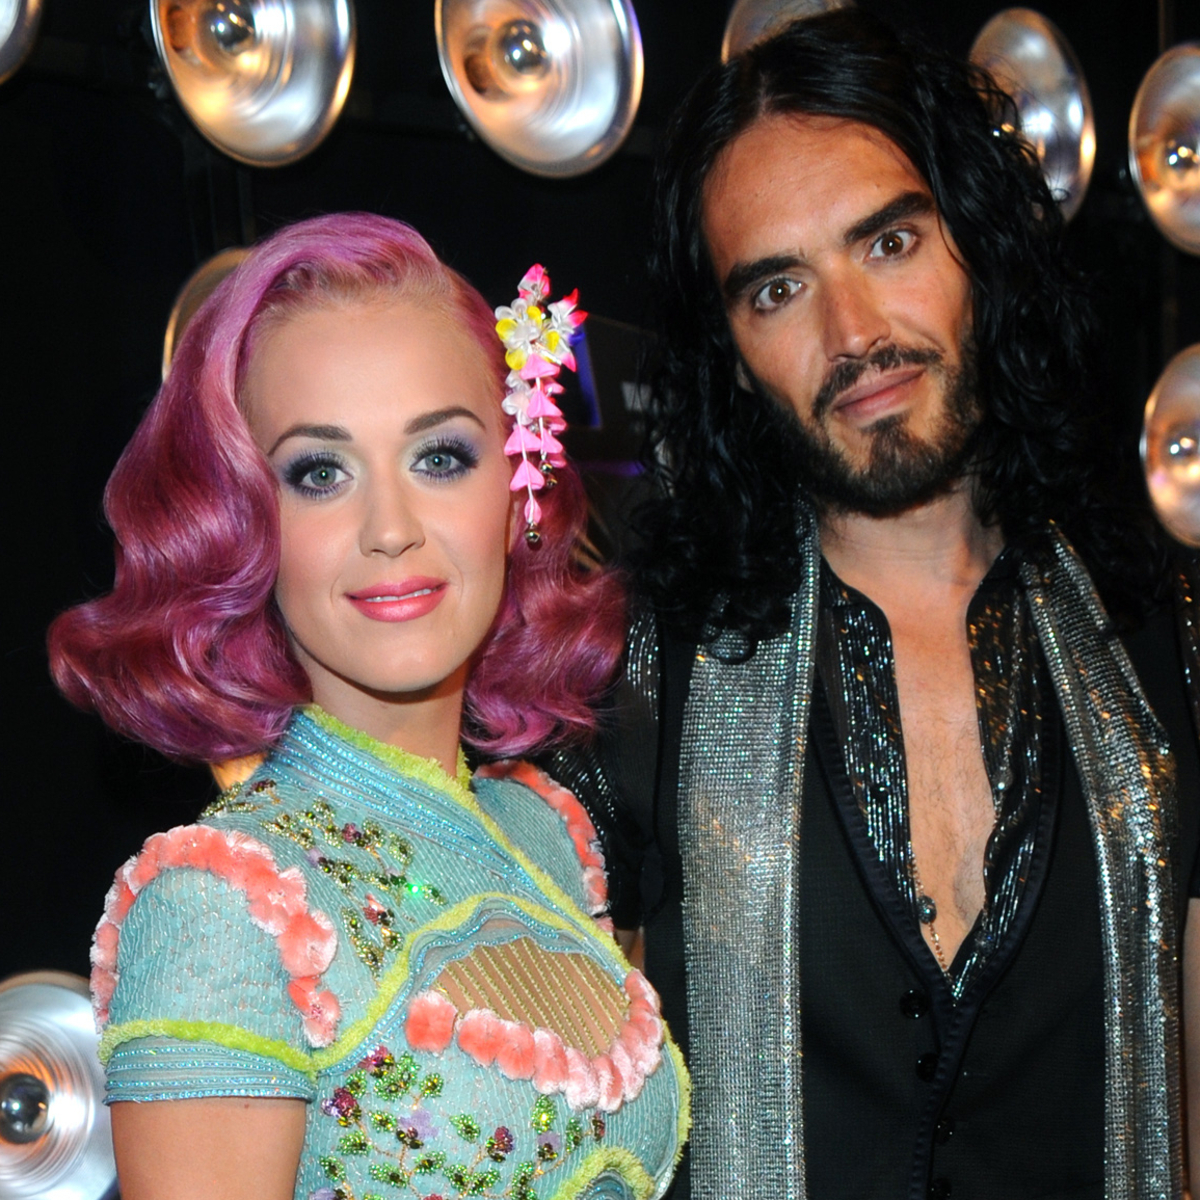 What Russell Brand and Katy Perry Have Said About Their Marriage